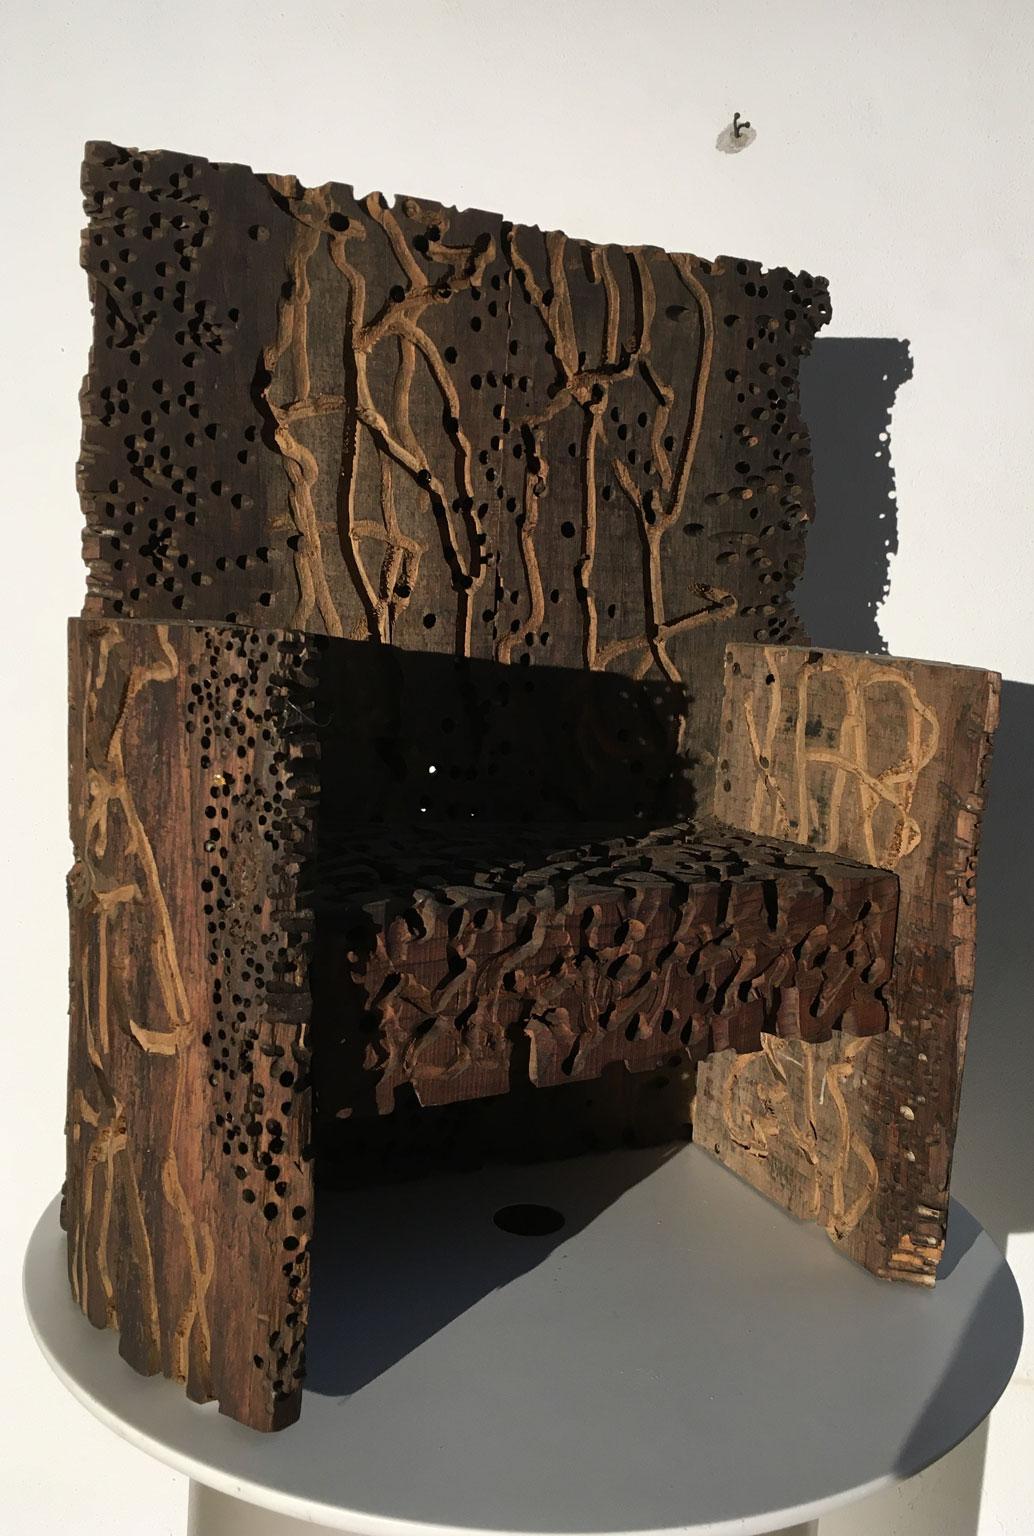 1985 Italy Wooden Abstract Sculpture by Urano Palma Grande Trono Big Throne For Sale 13